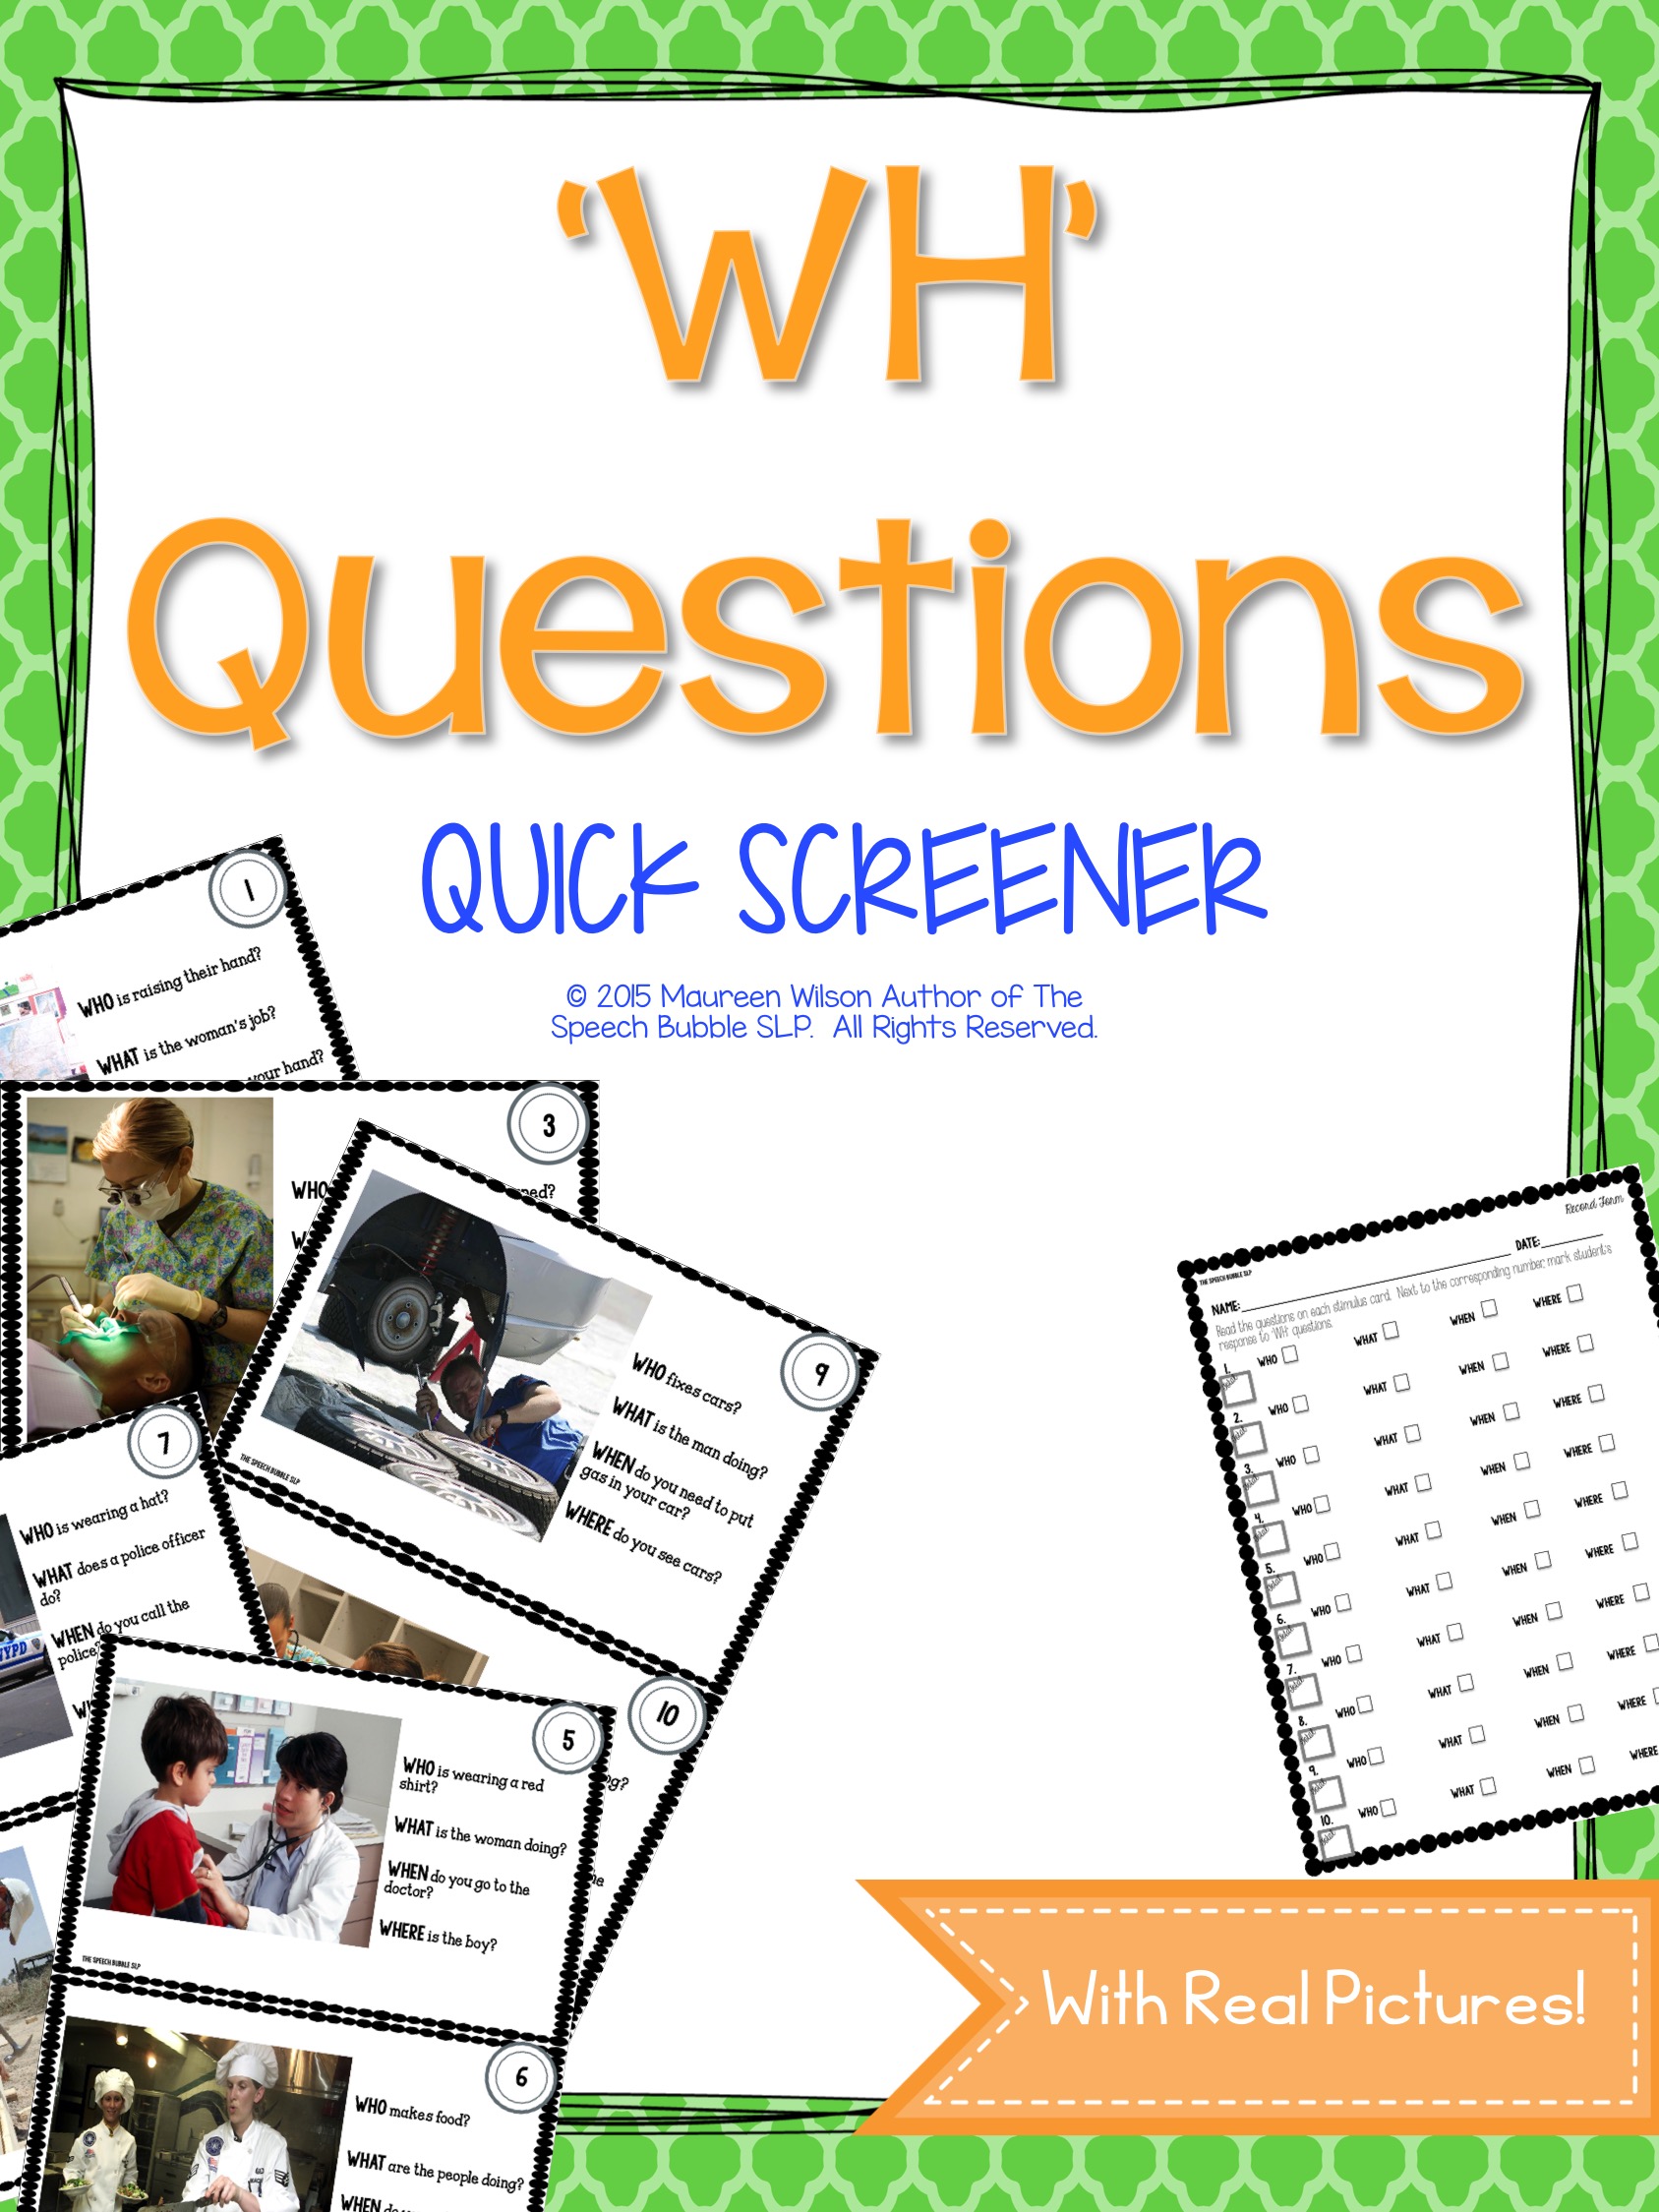 The ‘WH’ Question Screener